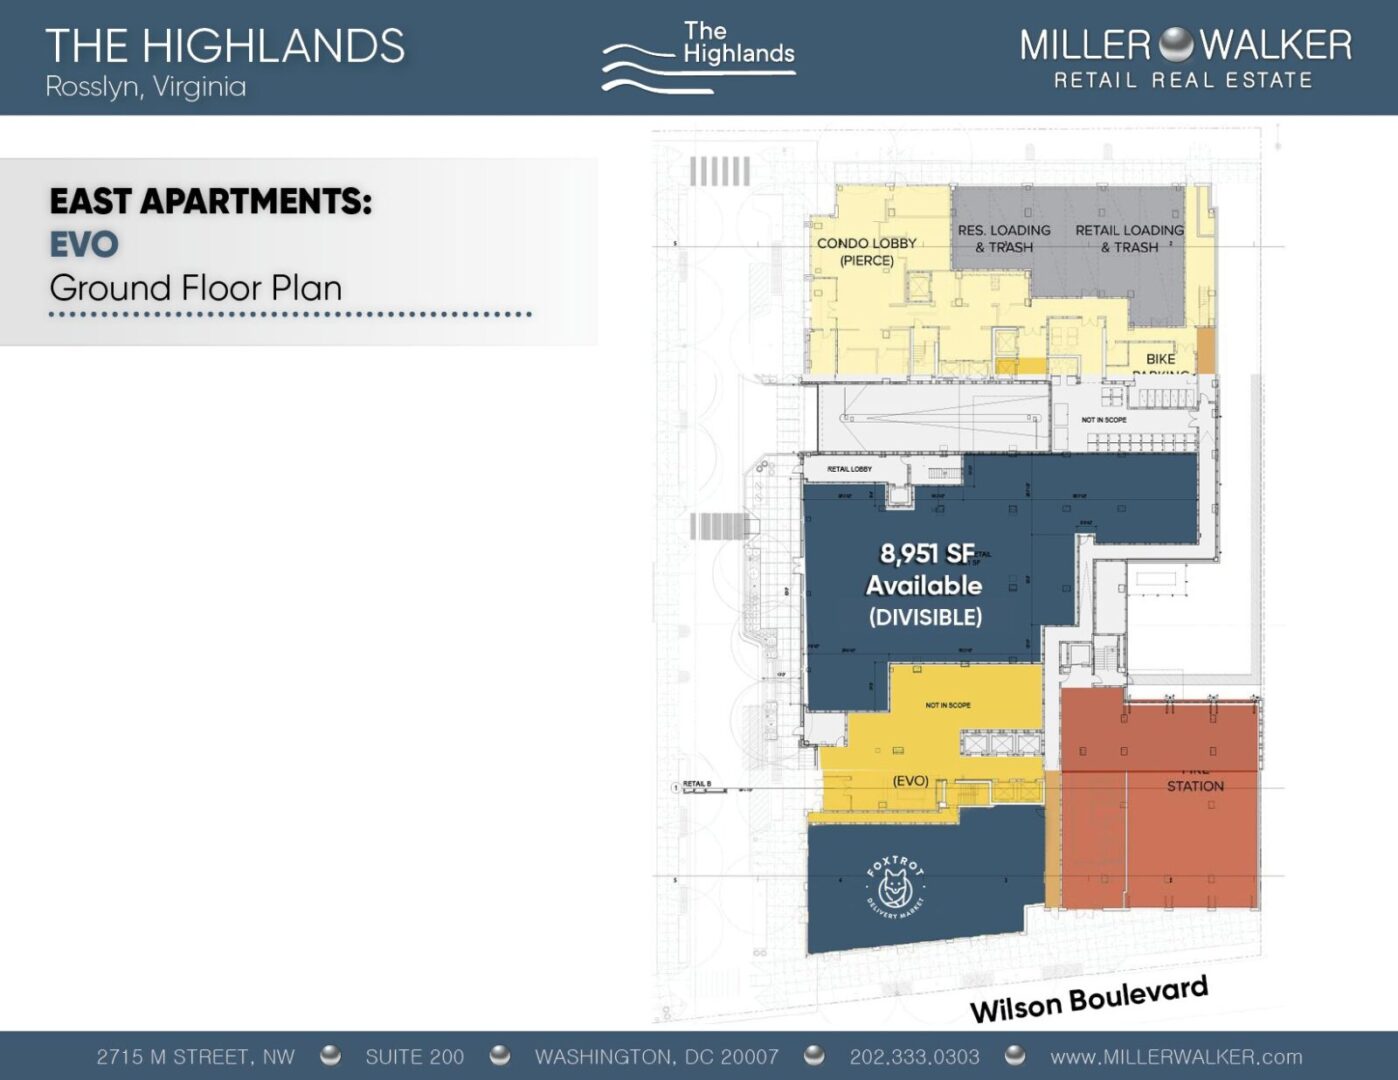 the highlands rosslyn va floor plans for retail stores